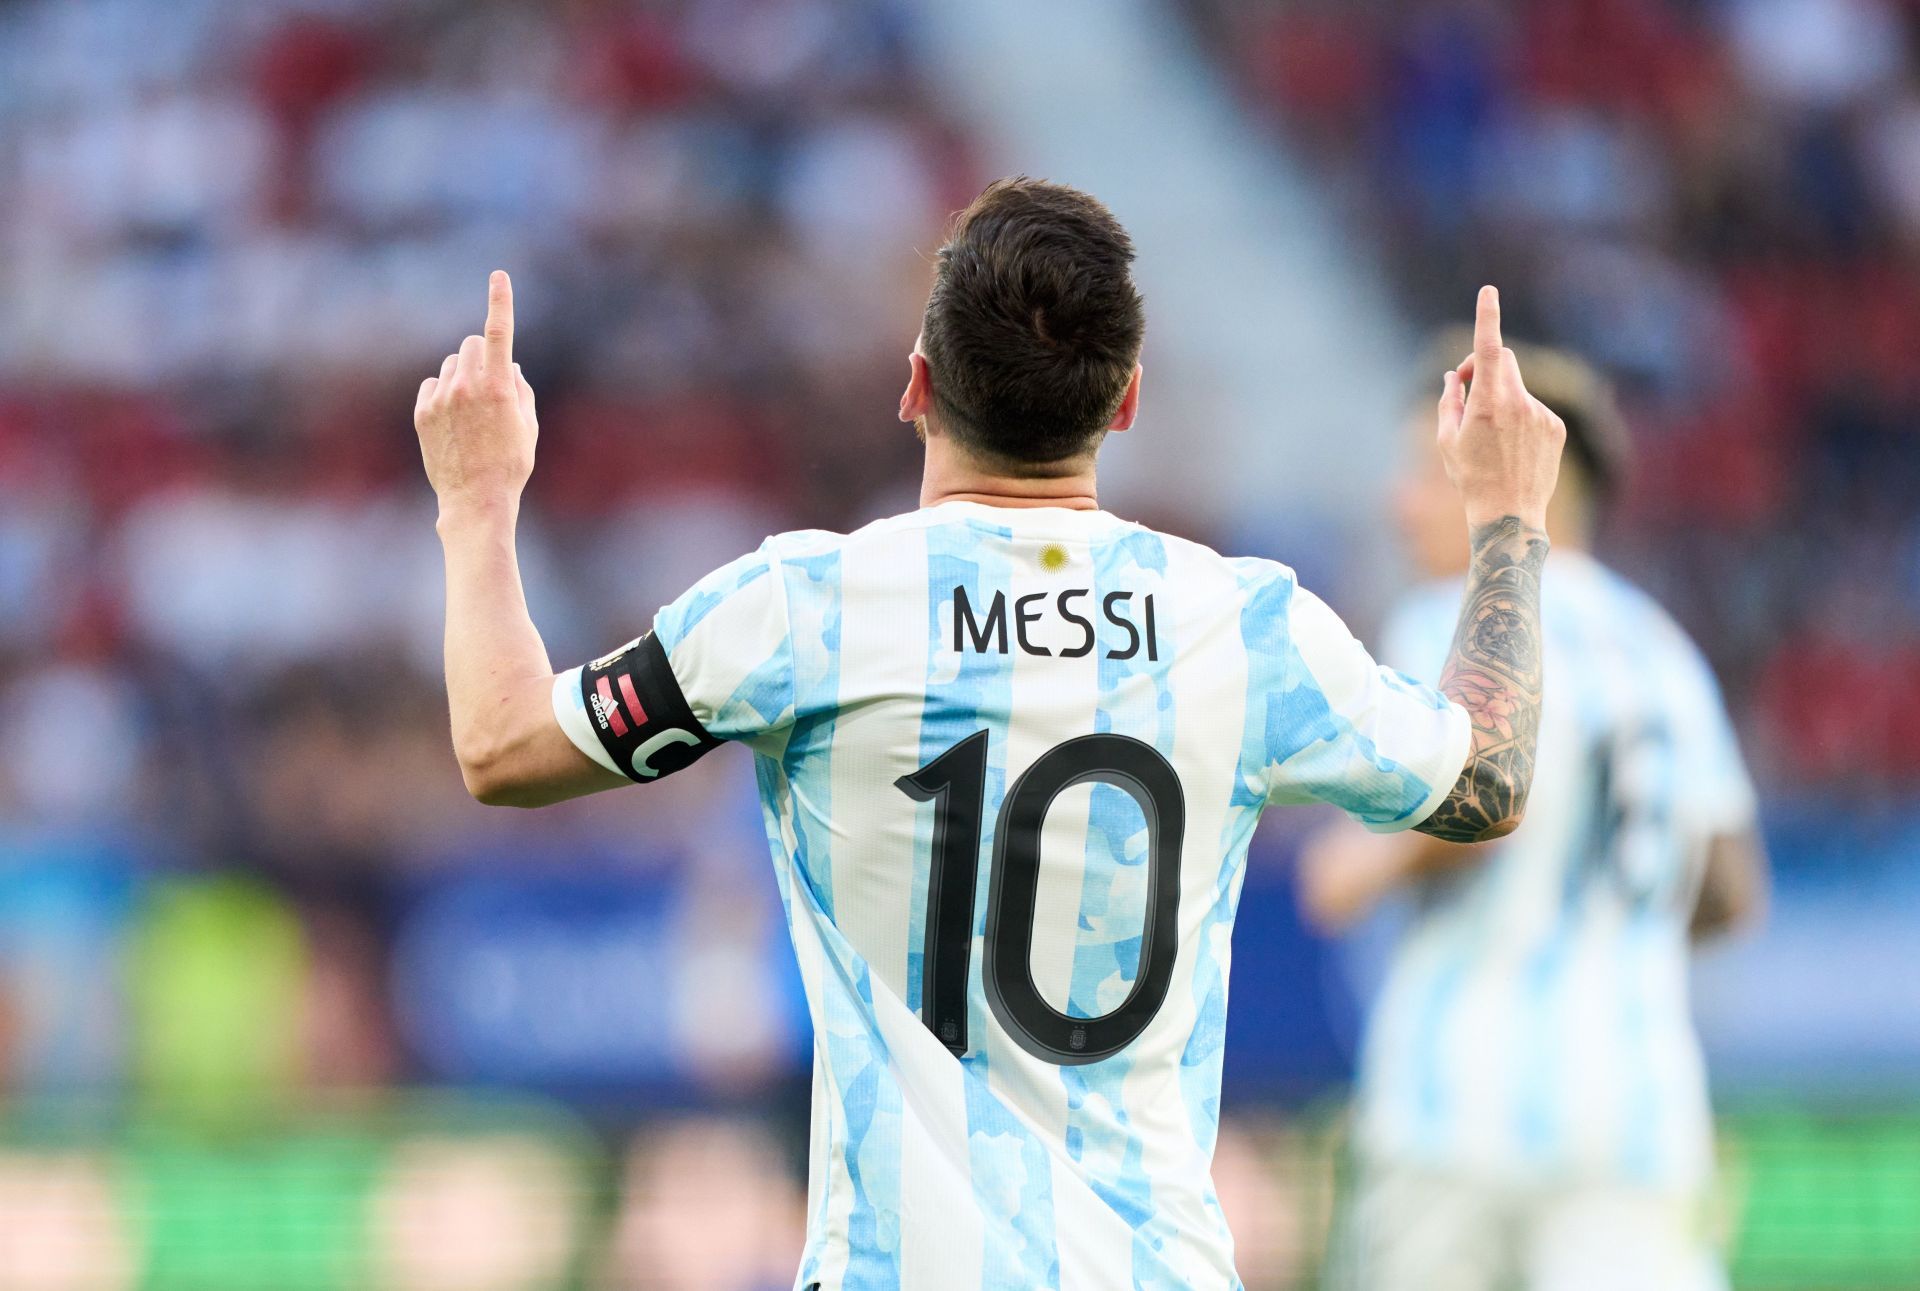 Messi will once again have to assume the role of Messiah as he so often does in Argentina colours